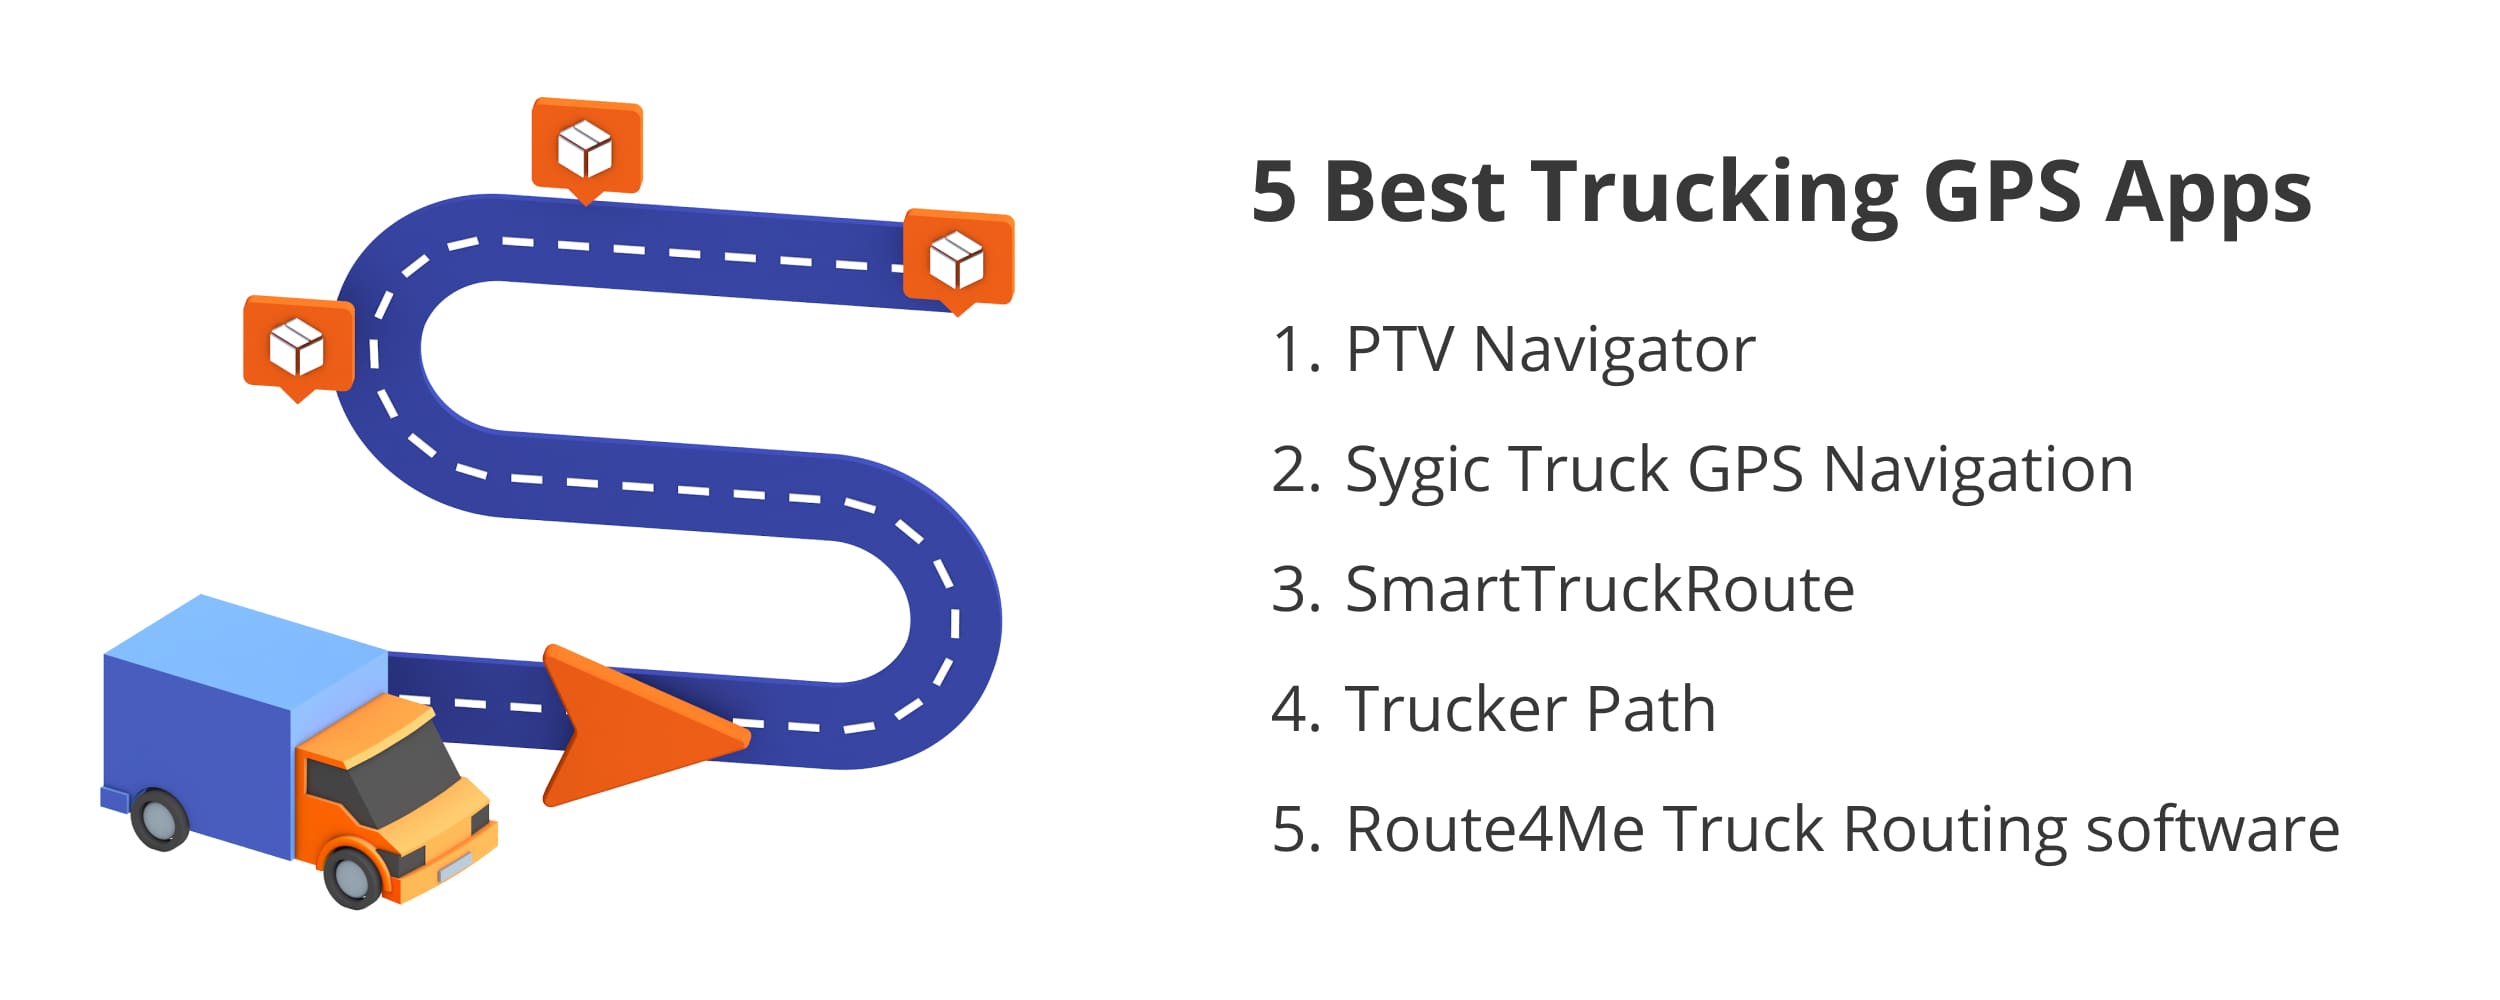 5 of the best truck GPS apps in 2021.